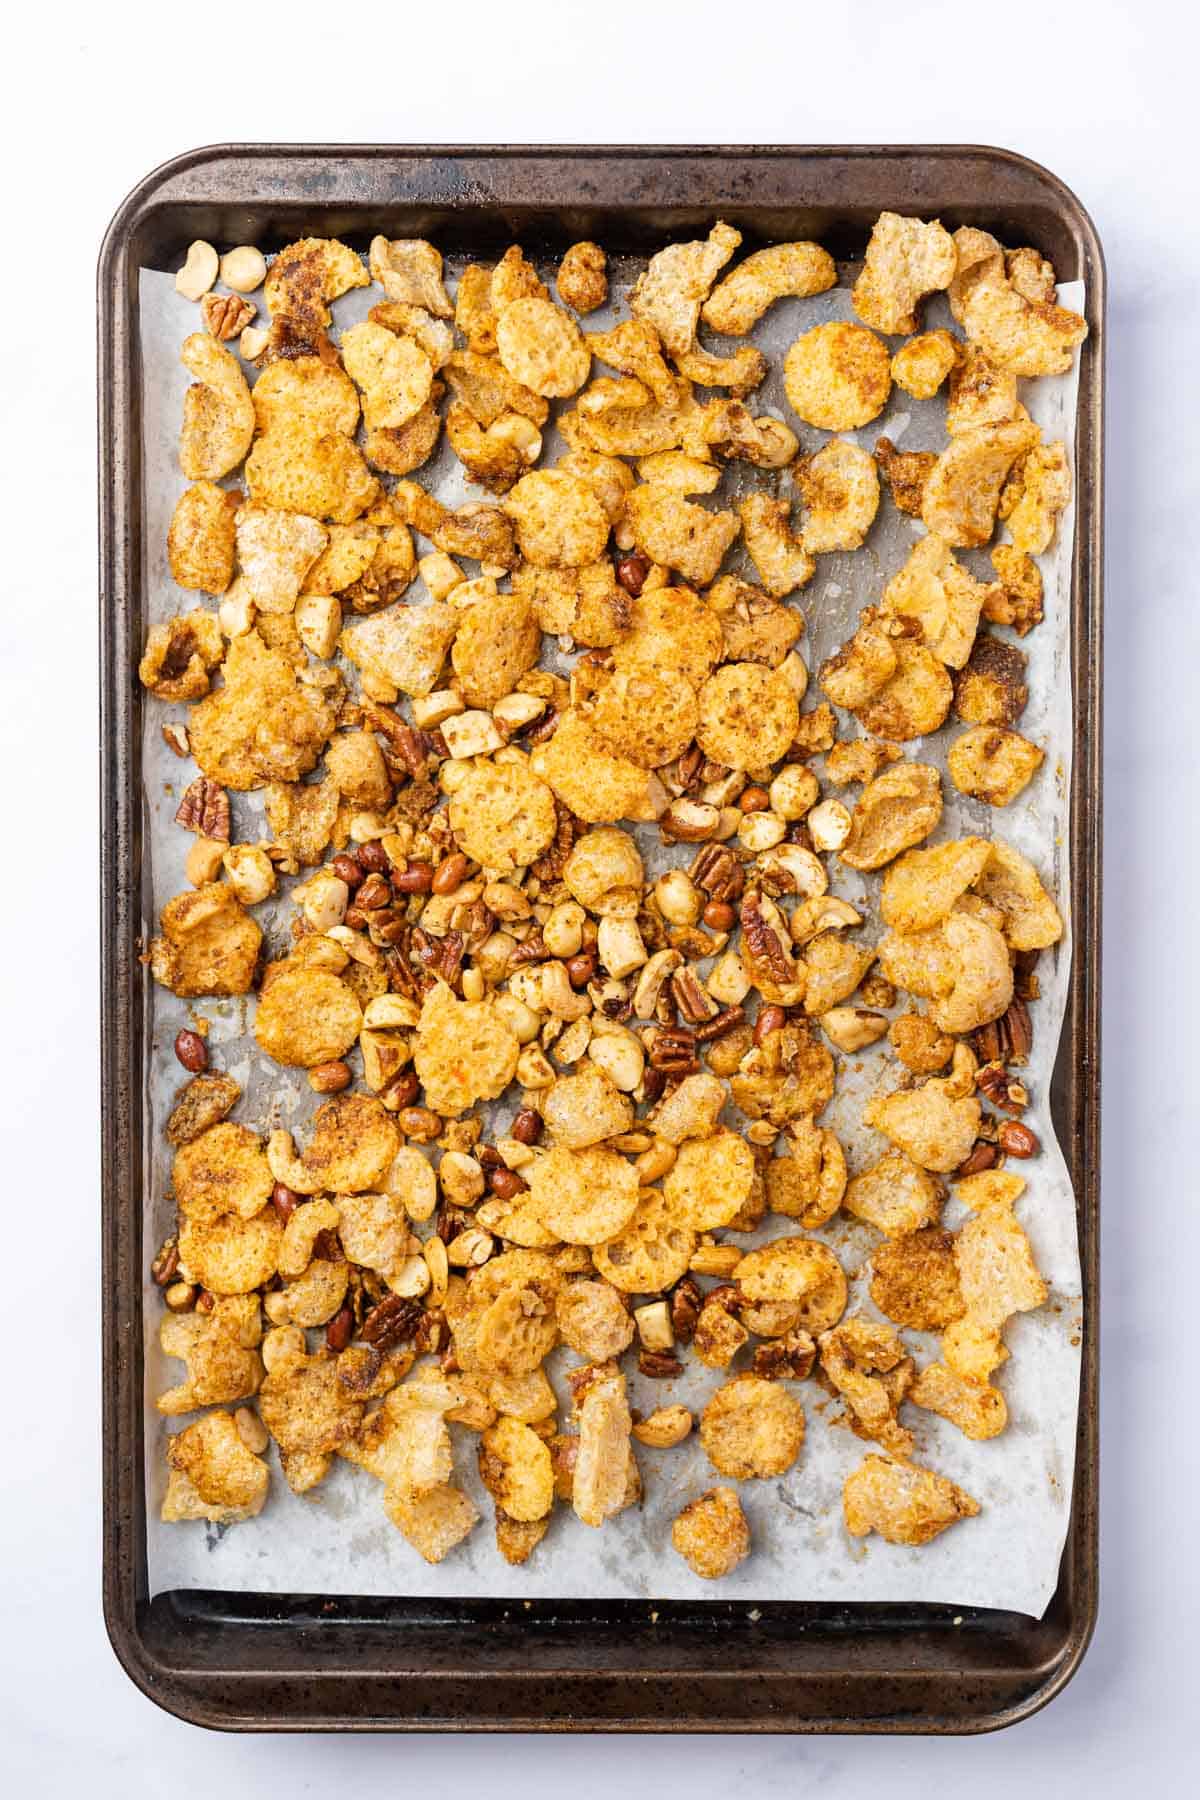 tray of snack mix on a baking sheet